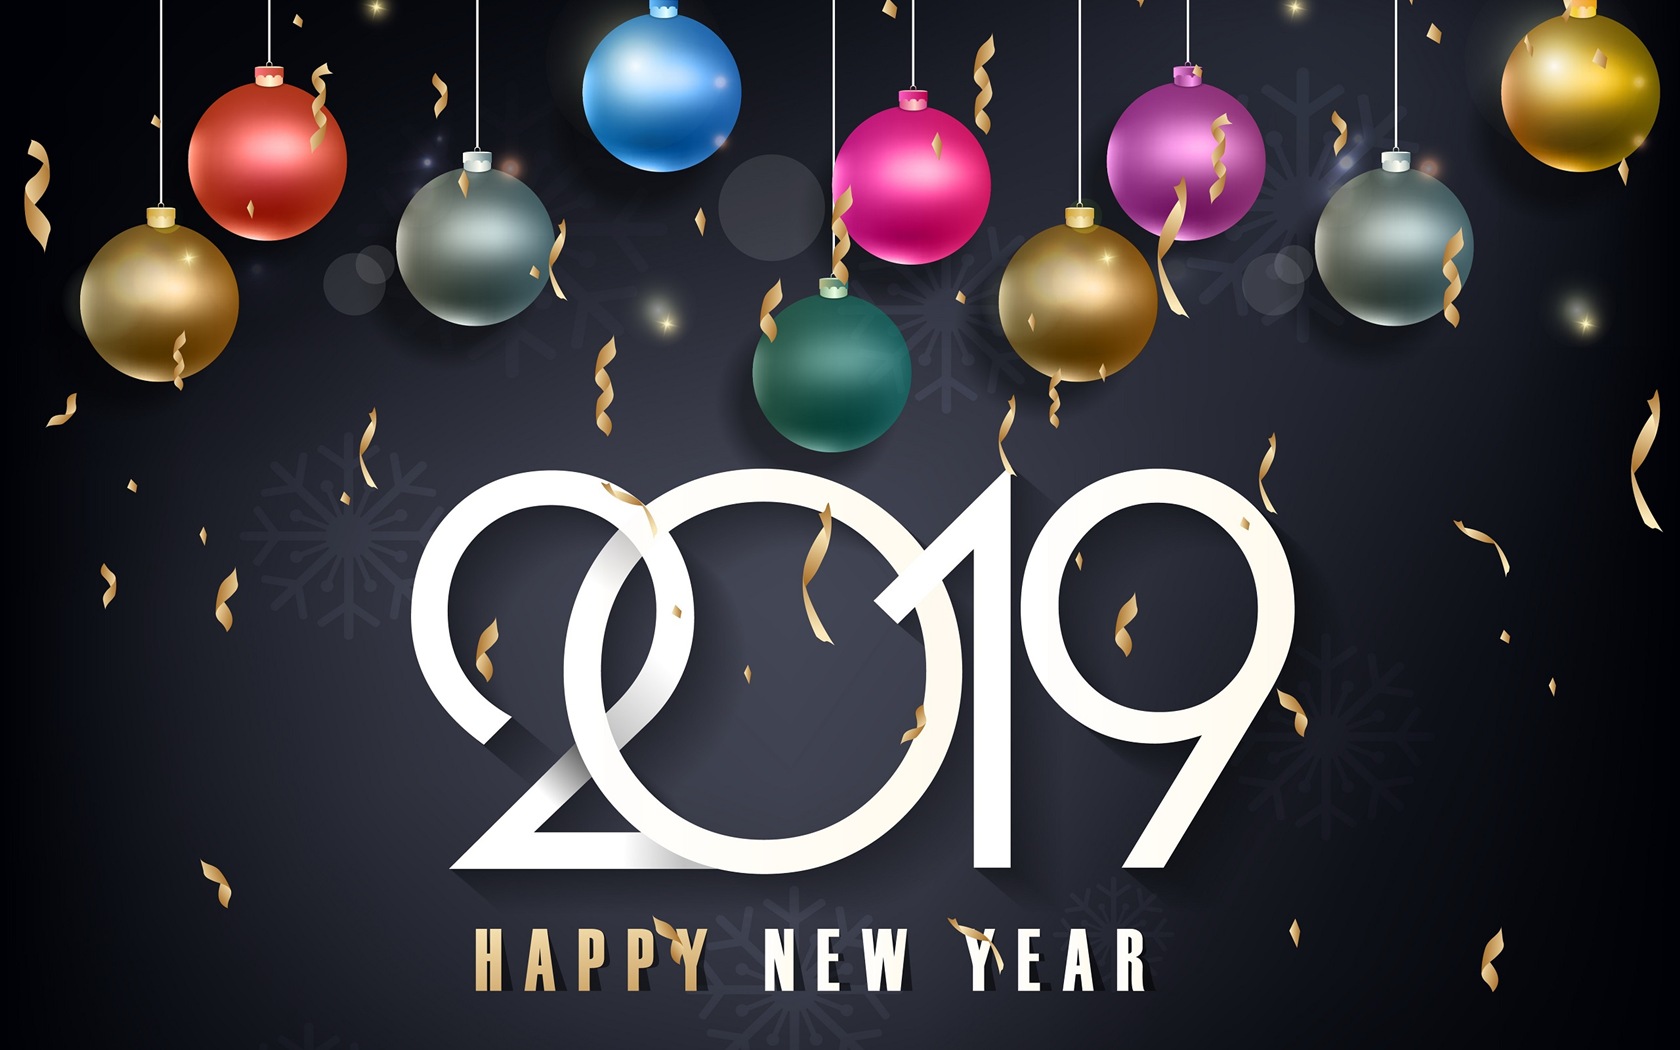 Happy New Year 2019 HD wallpapers #9 - 1680x1050